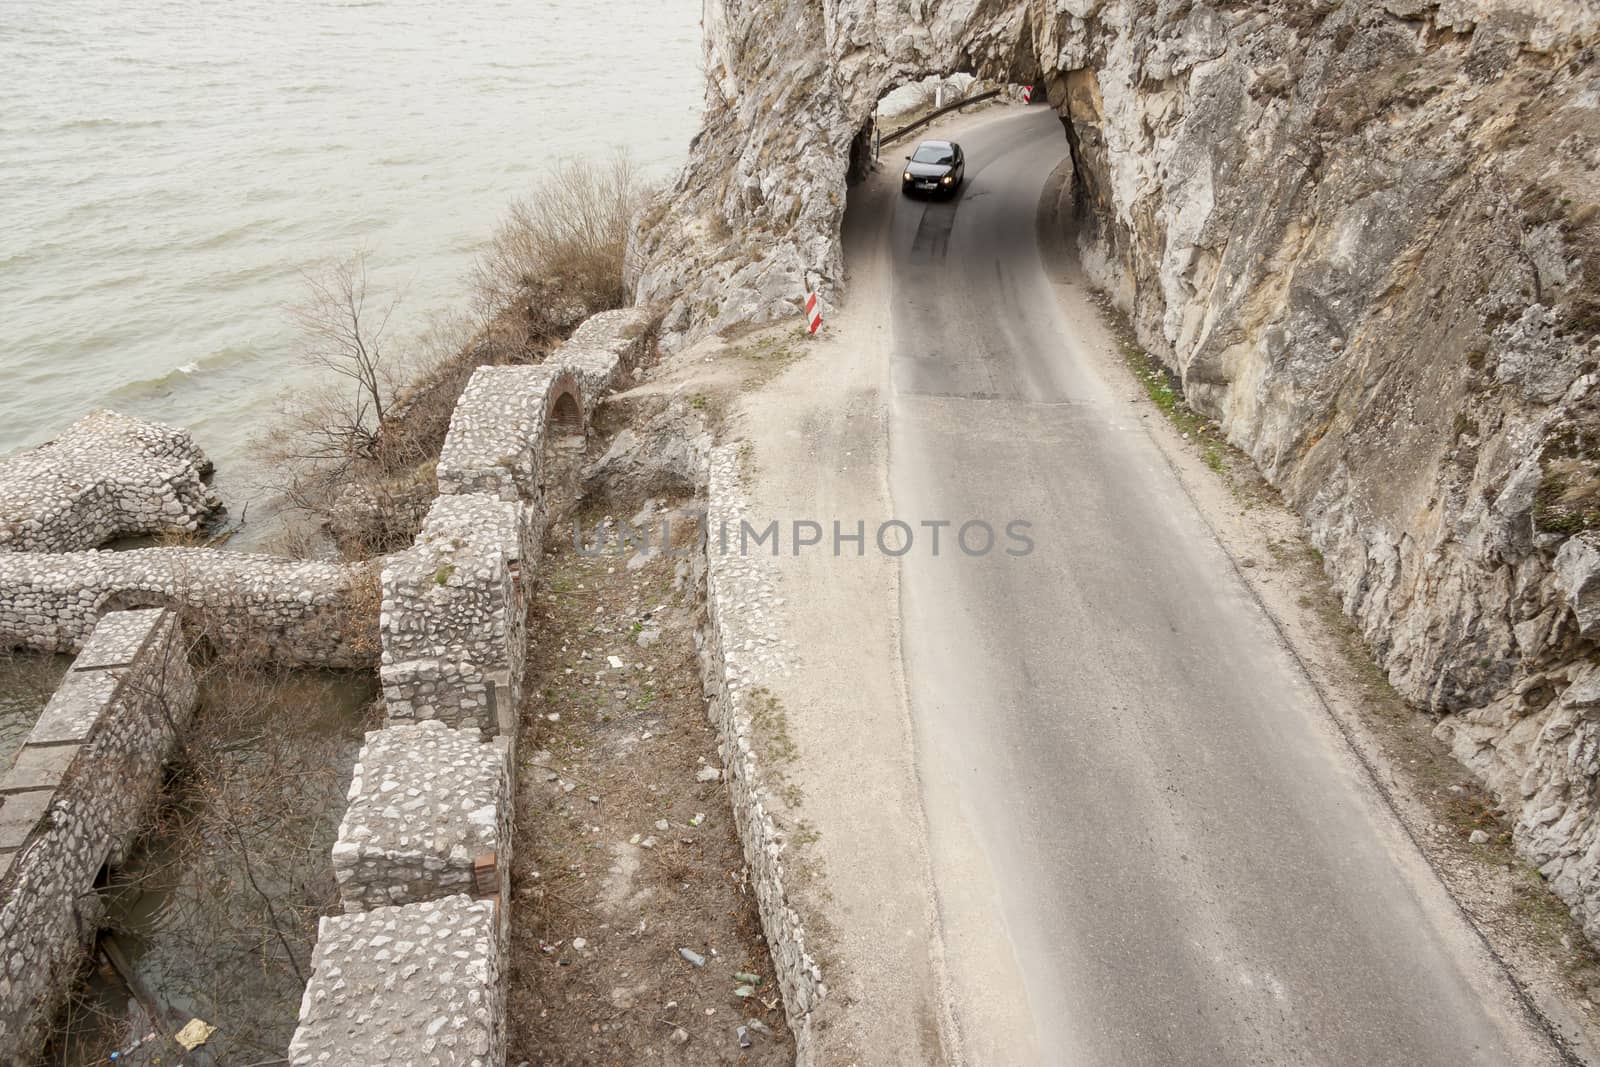 Narrow route and small tunnel - Golubac, Serbia. by parys